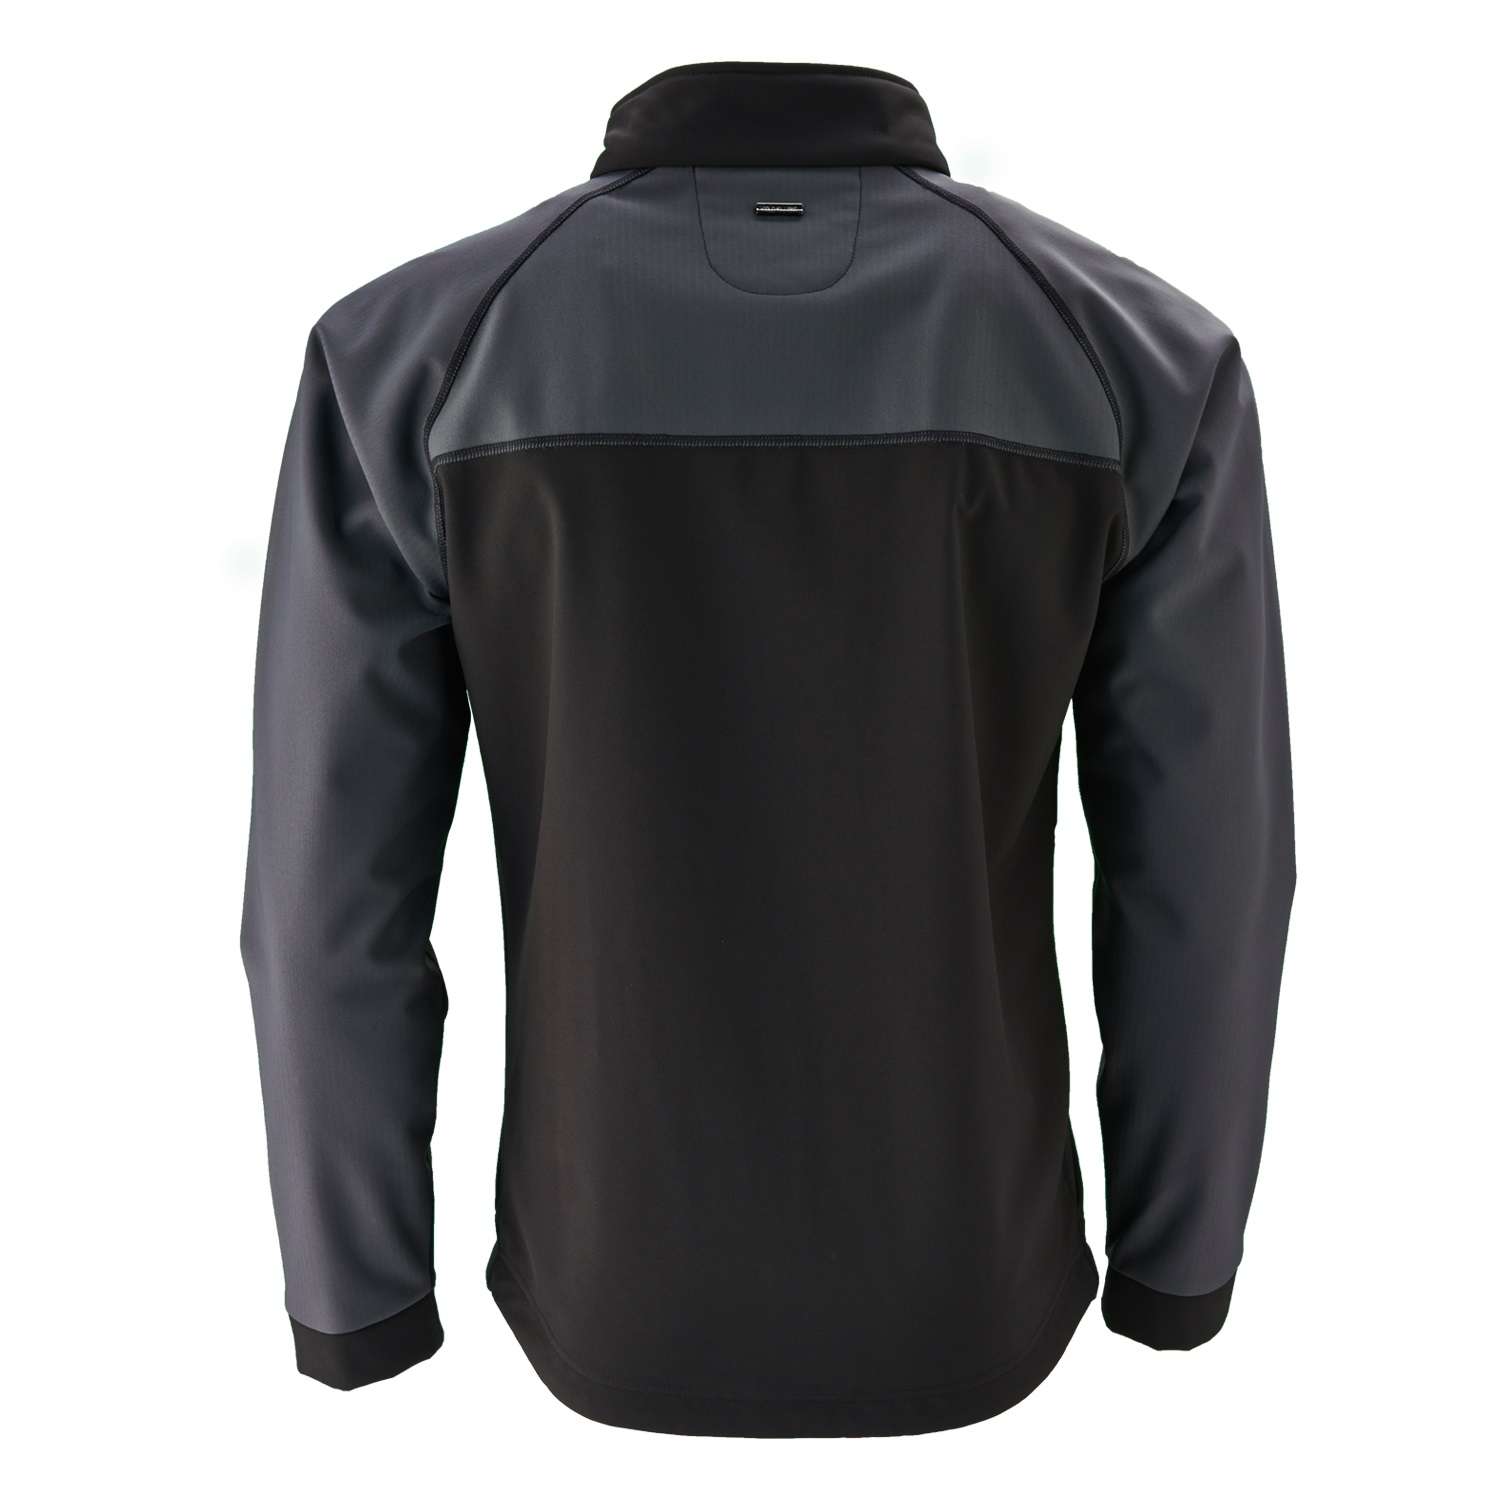 Knox  Cold Killers Wind Buddy V15 Thermal Vest Windproof Sport /& Motorcycle Top